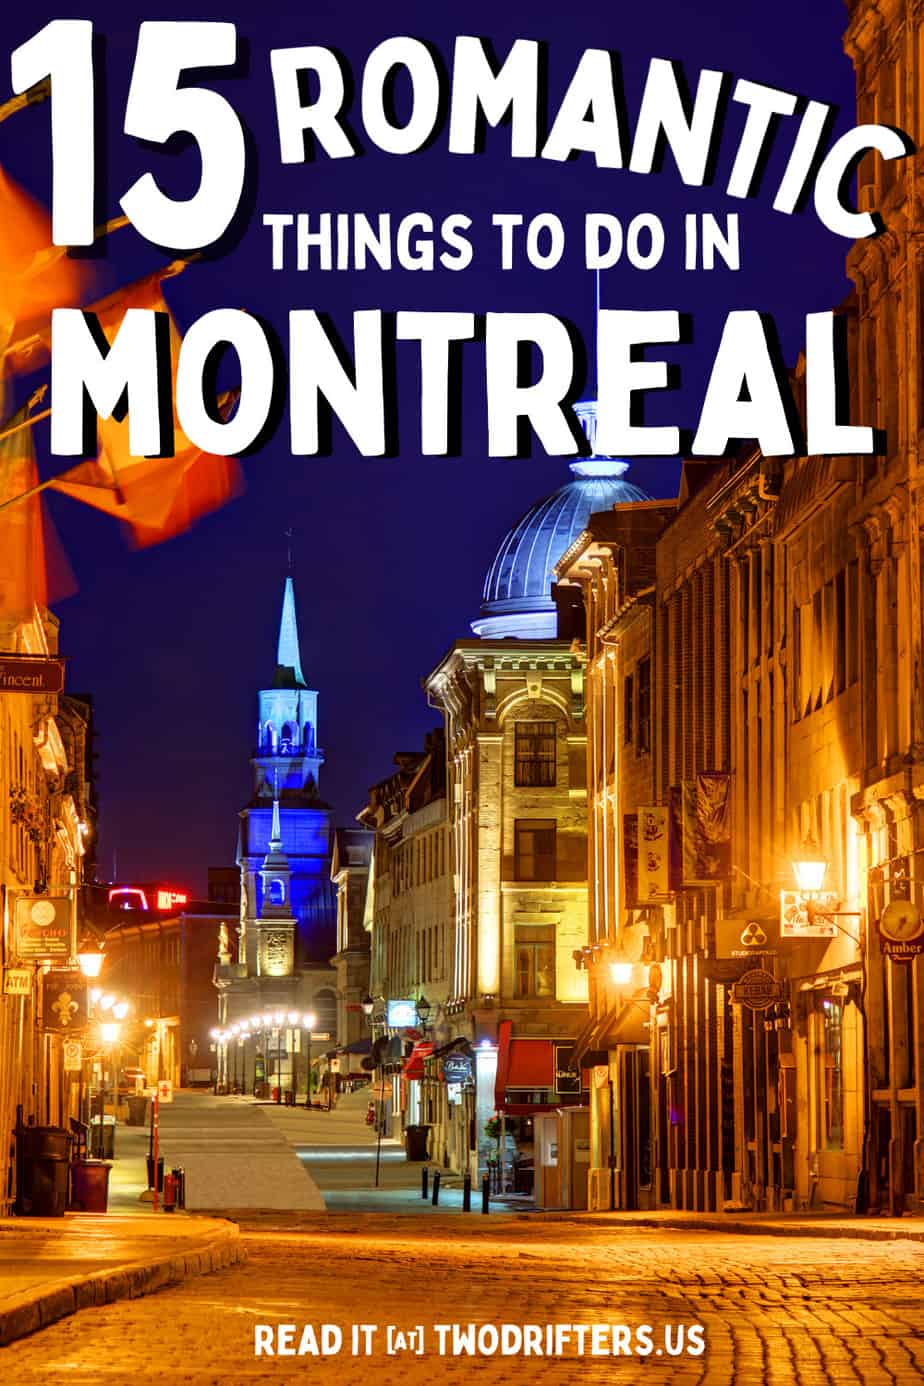 Pinterest social share image that says "15 Romantic Things to do in Montreal."